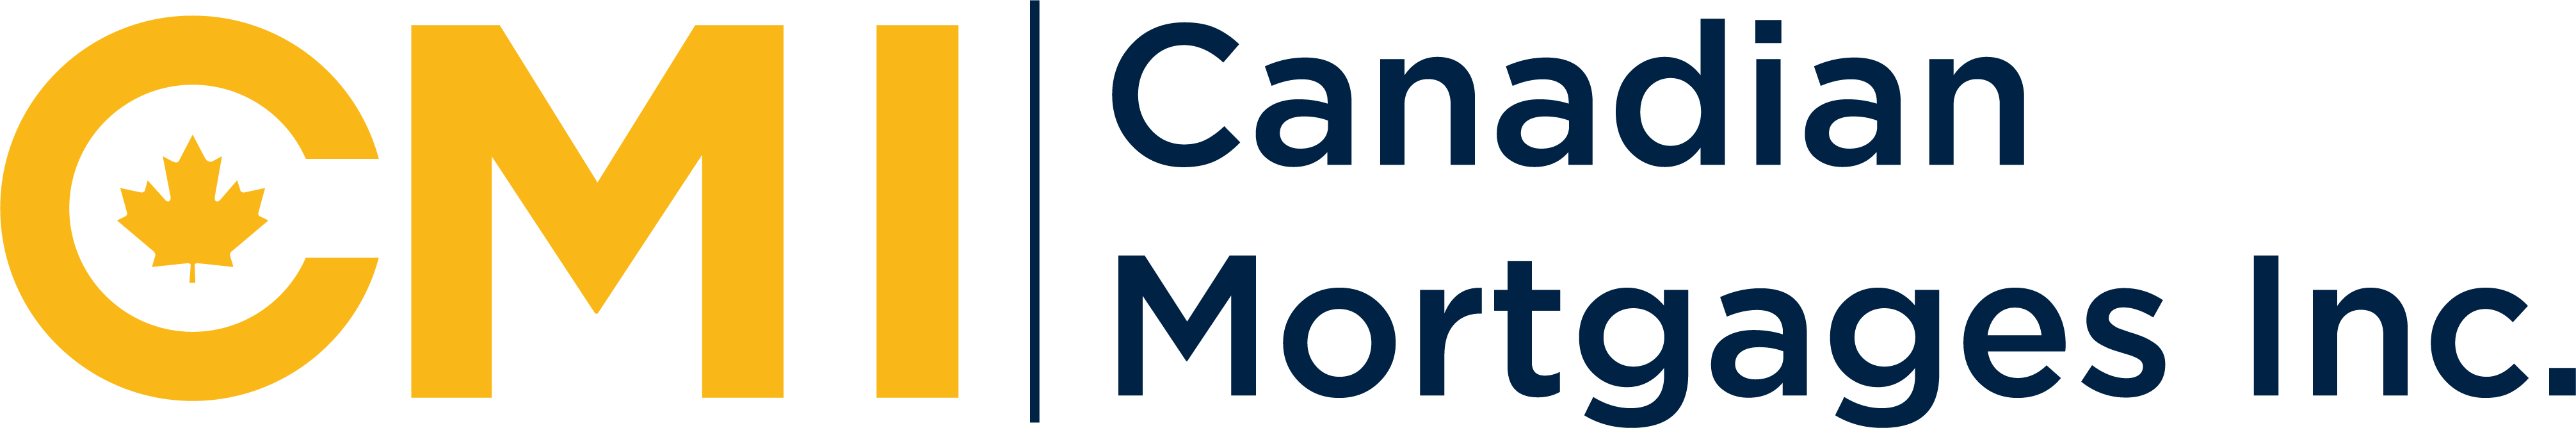 canadian mortgages logo